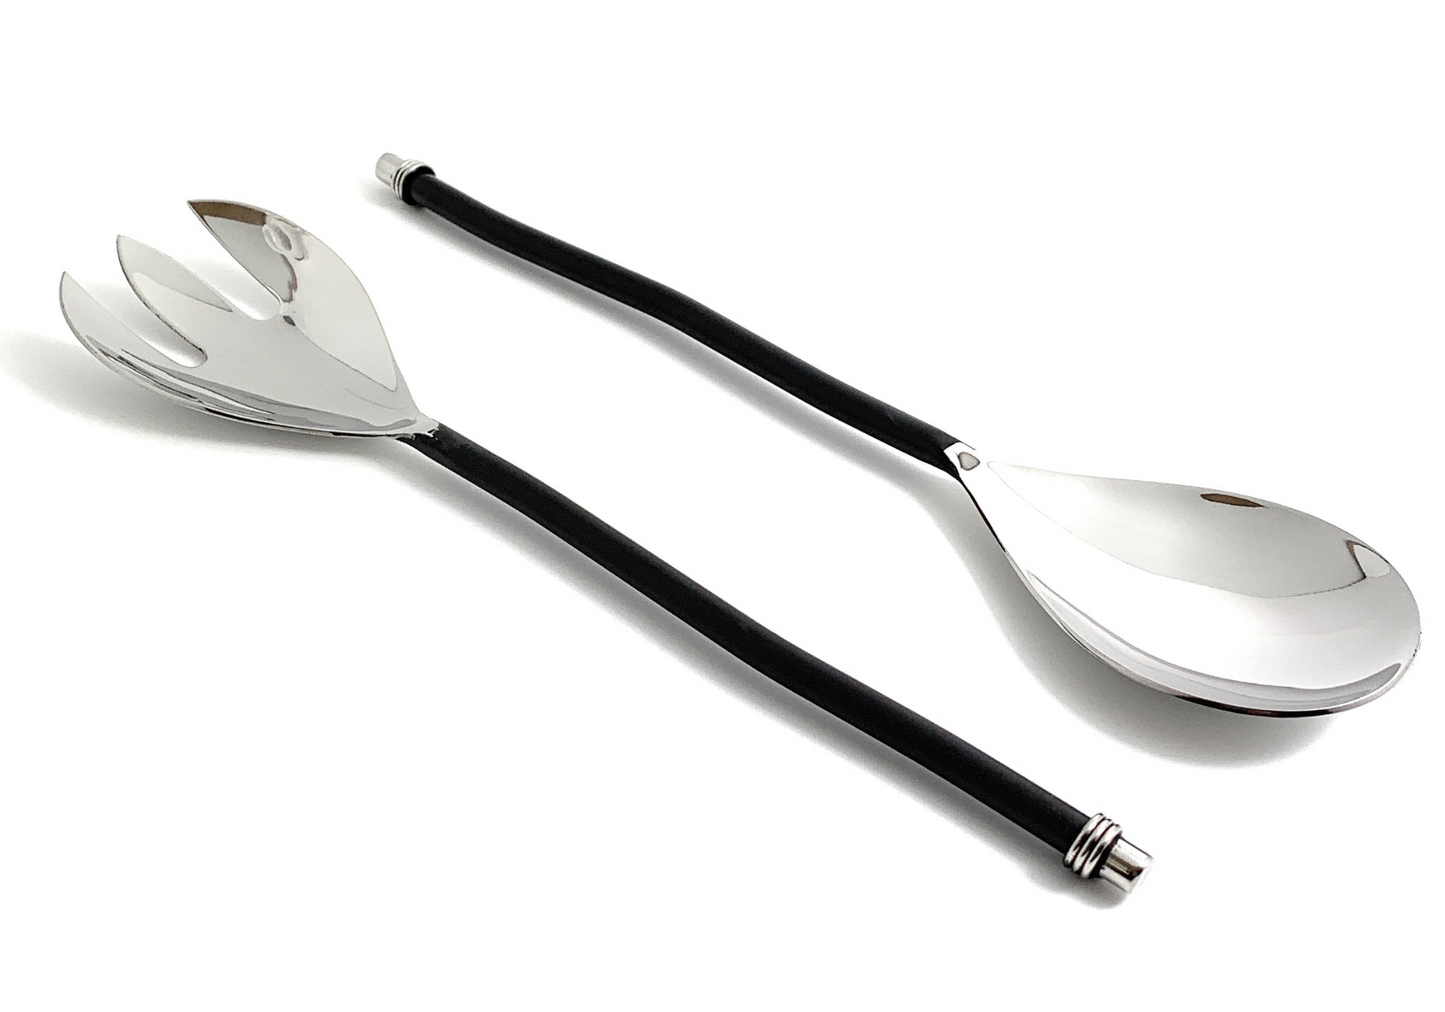 Vibhsa Salad Serving Set of 2 (Twisted Handle, Silver Finish)